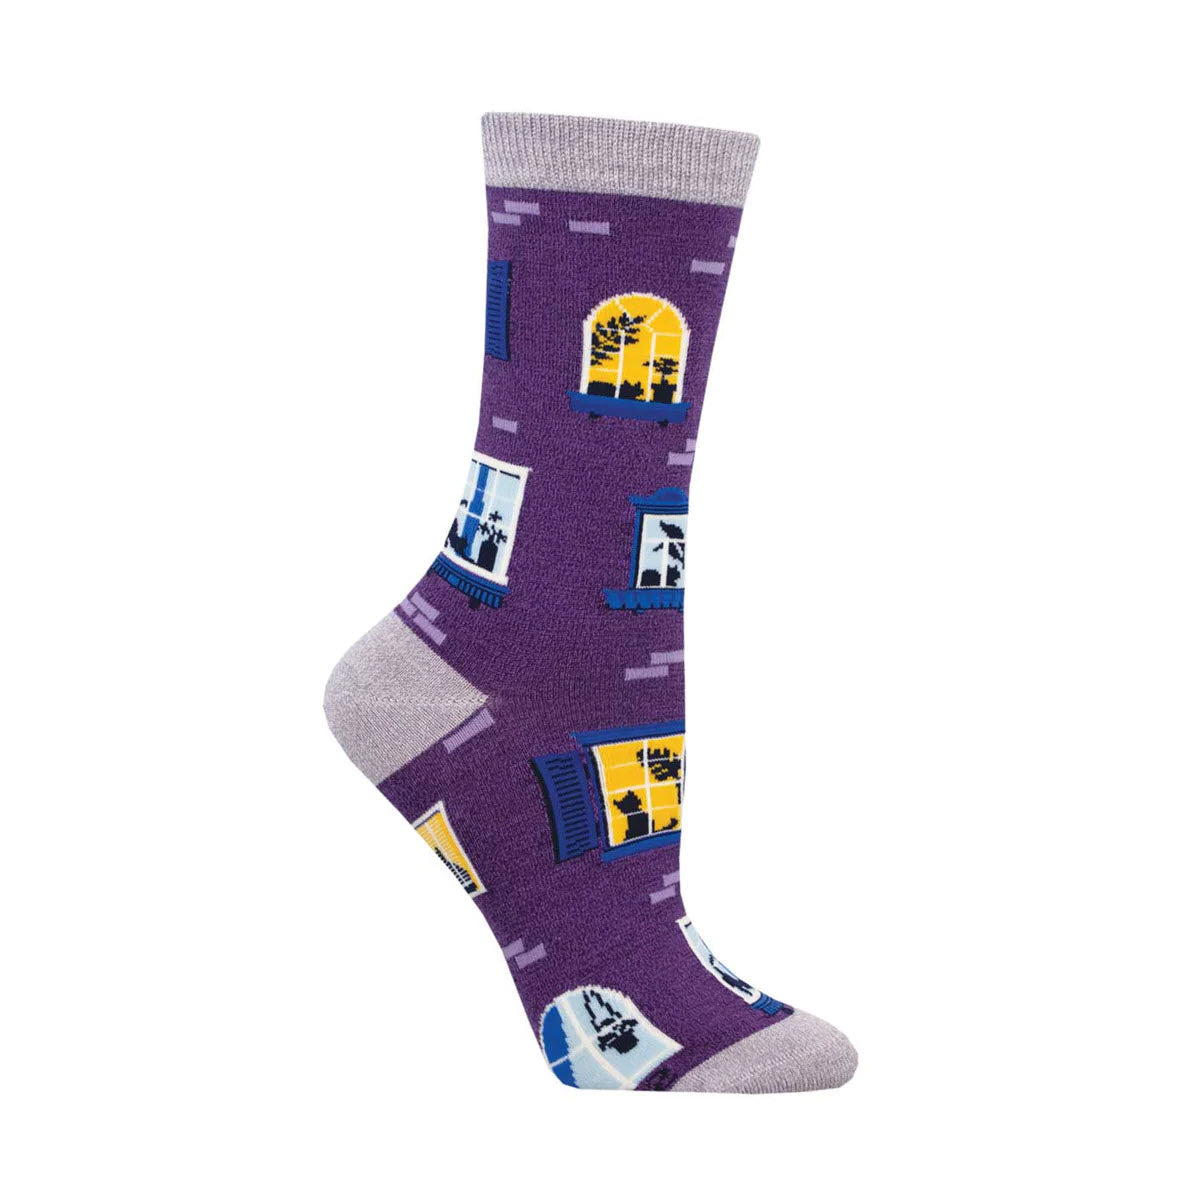 A single SOCKSMITH BAMBOO CREW SOCK featuring a soft purple and grey design with various construction vehicle motifs and tools.